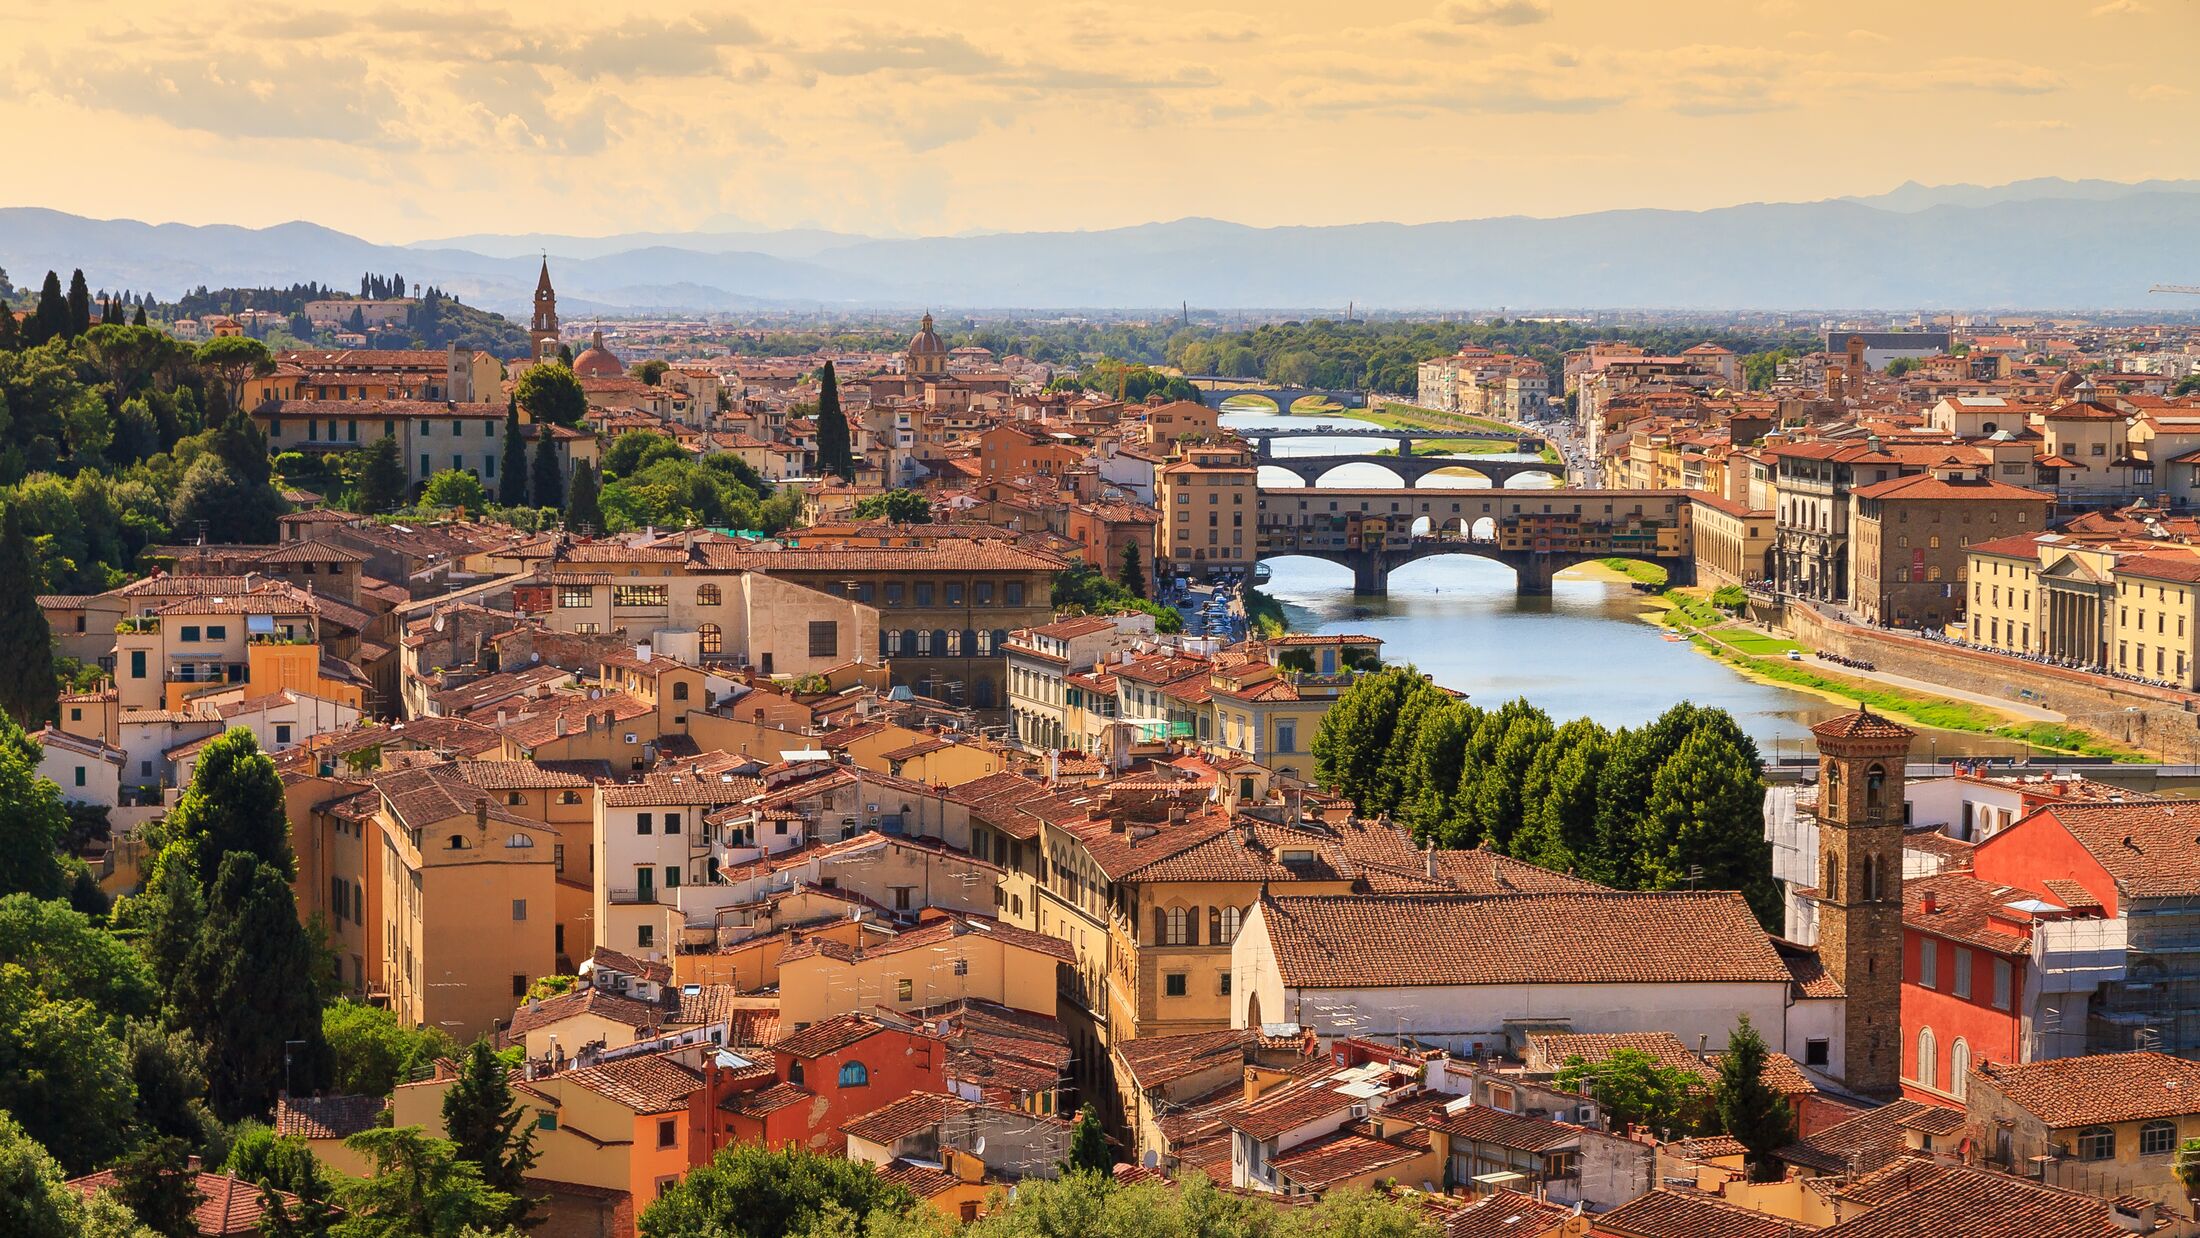 Beautiful cityscape skyline of Firenze (Florence), Italy, with the bridges over the river Arno